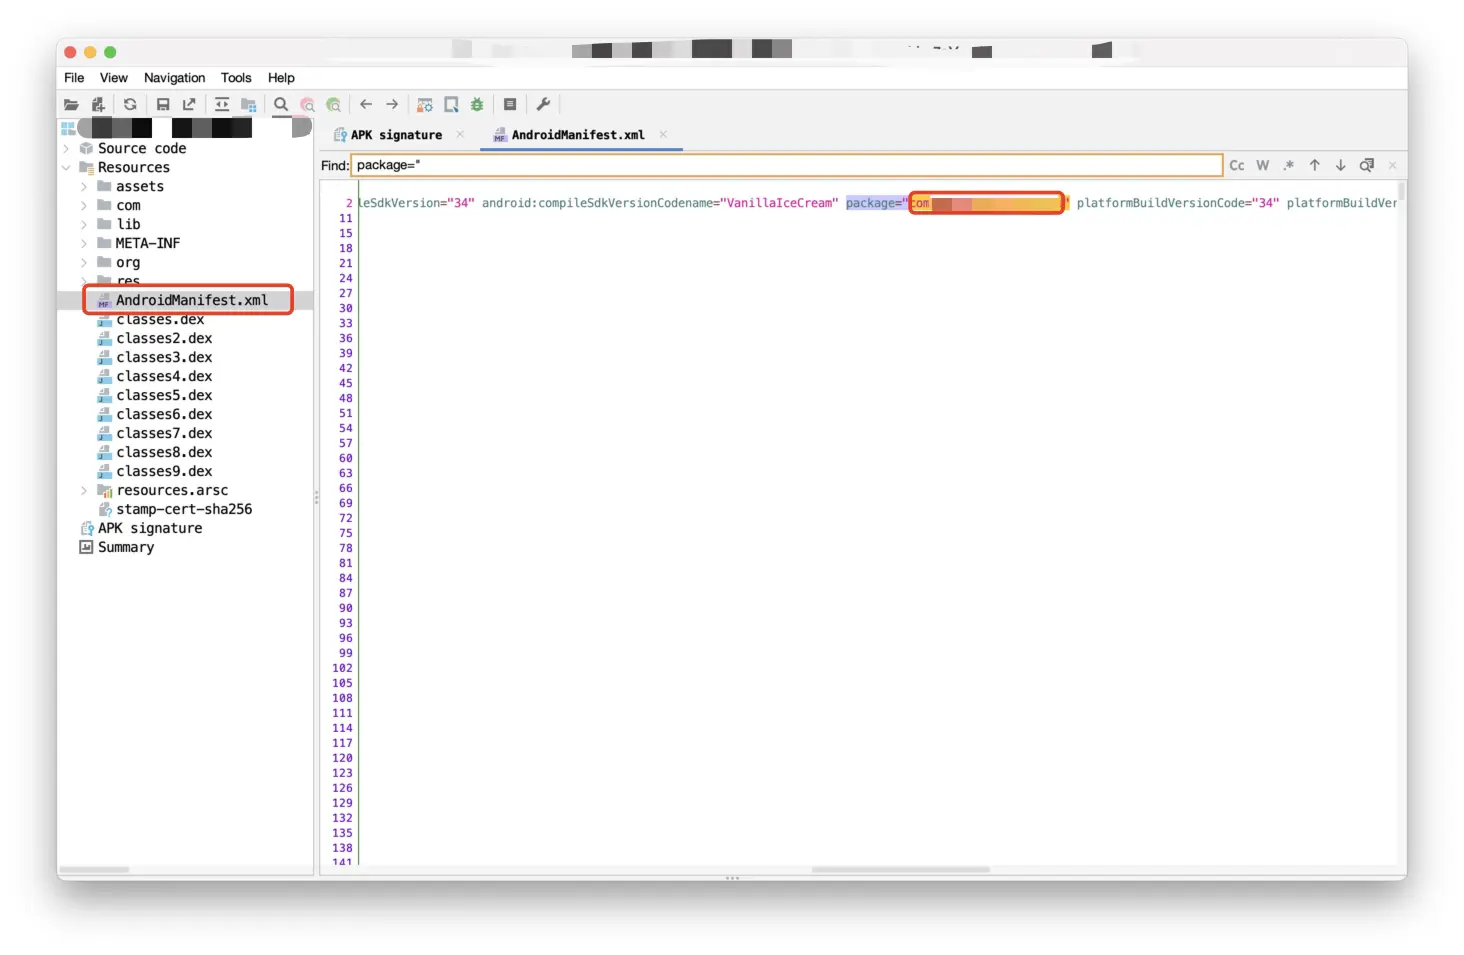 Screenshot demonstrating how to find the app's package name within the AndroidManifest.xml file using JadxGUI.